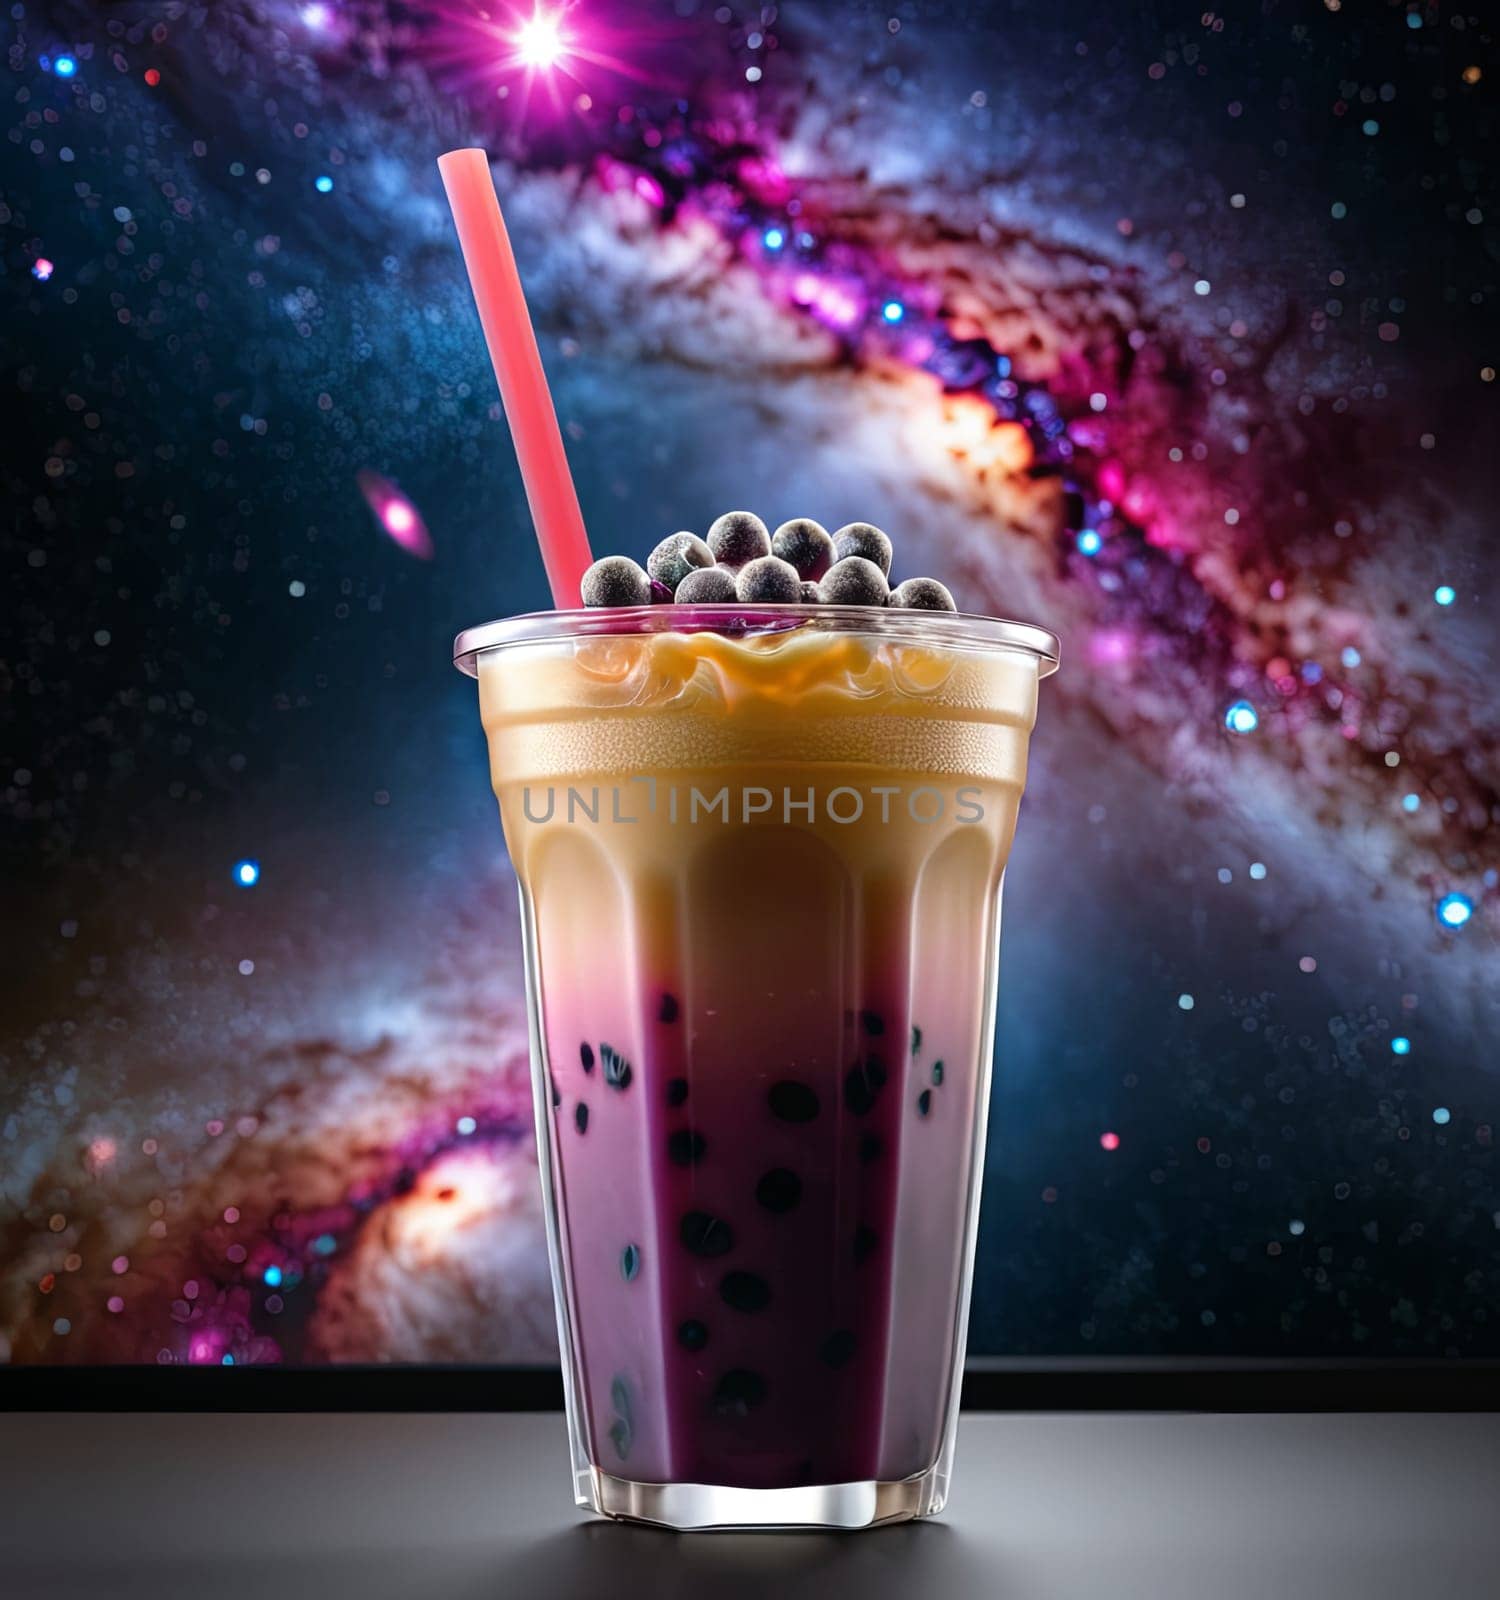 Bubble tea with black pearls and cream, foreground. Background displays a vibrant galaxy adorned with stars and nebulae. by Matiunina